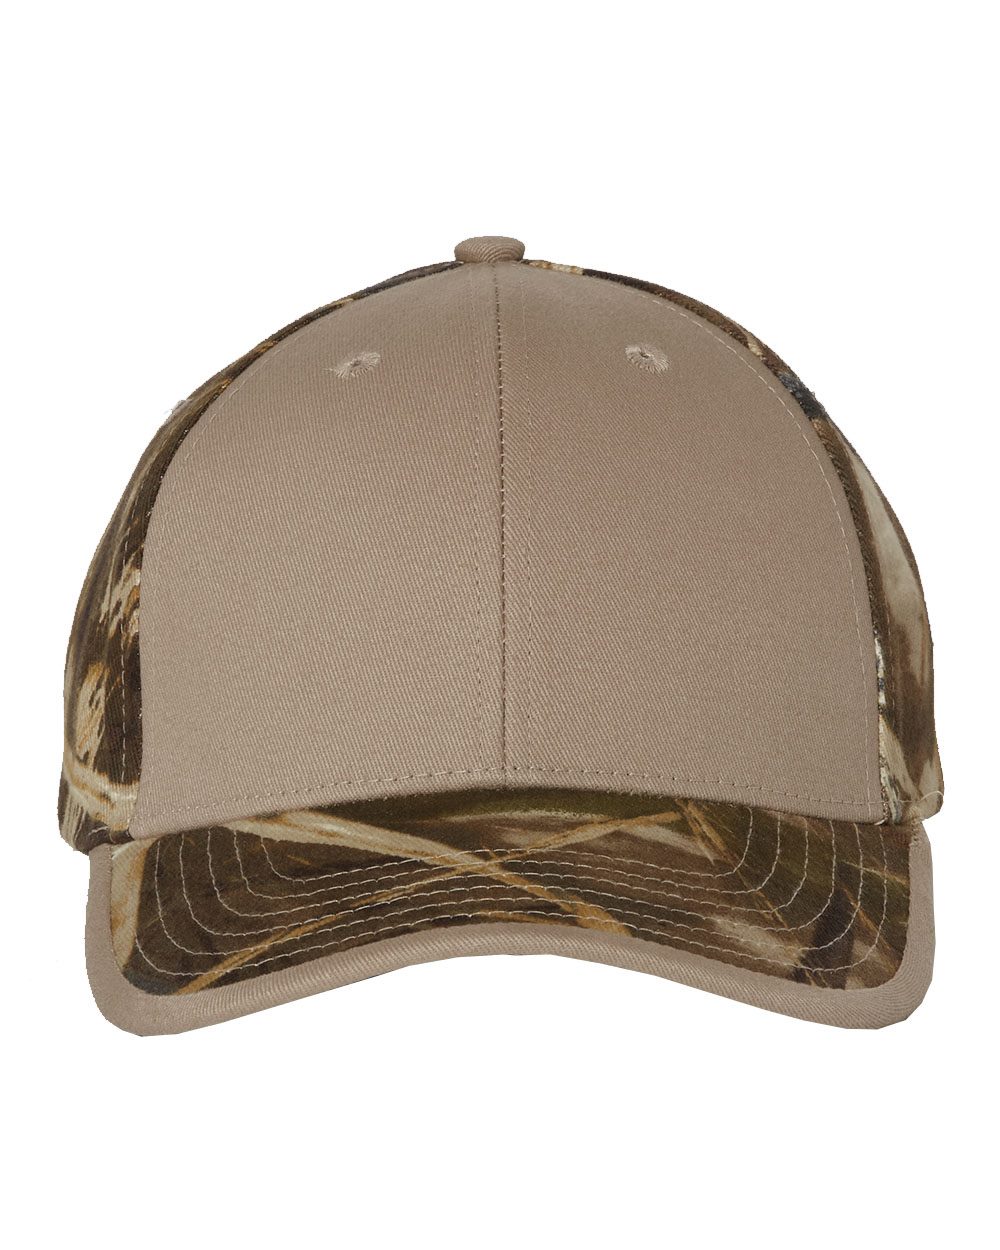 LC102 Solid Front Camouflage Cap Kati